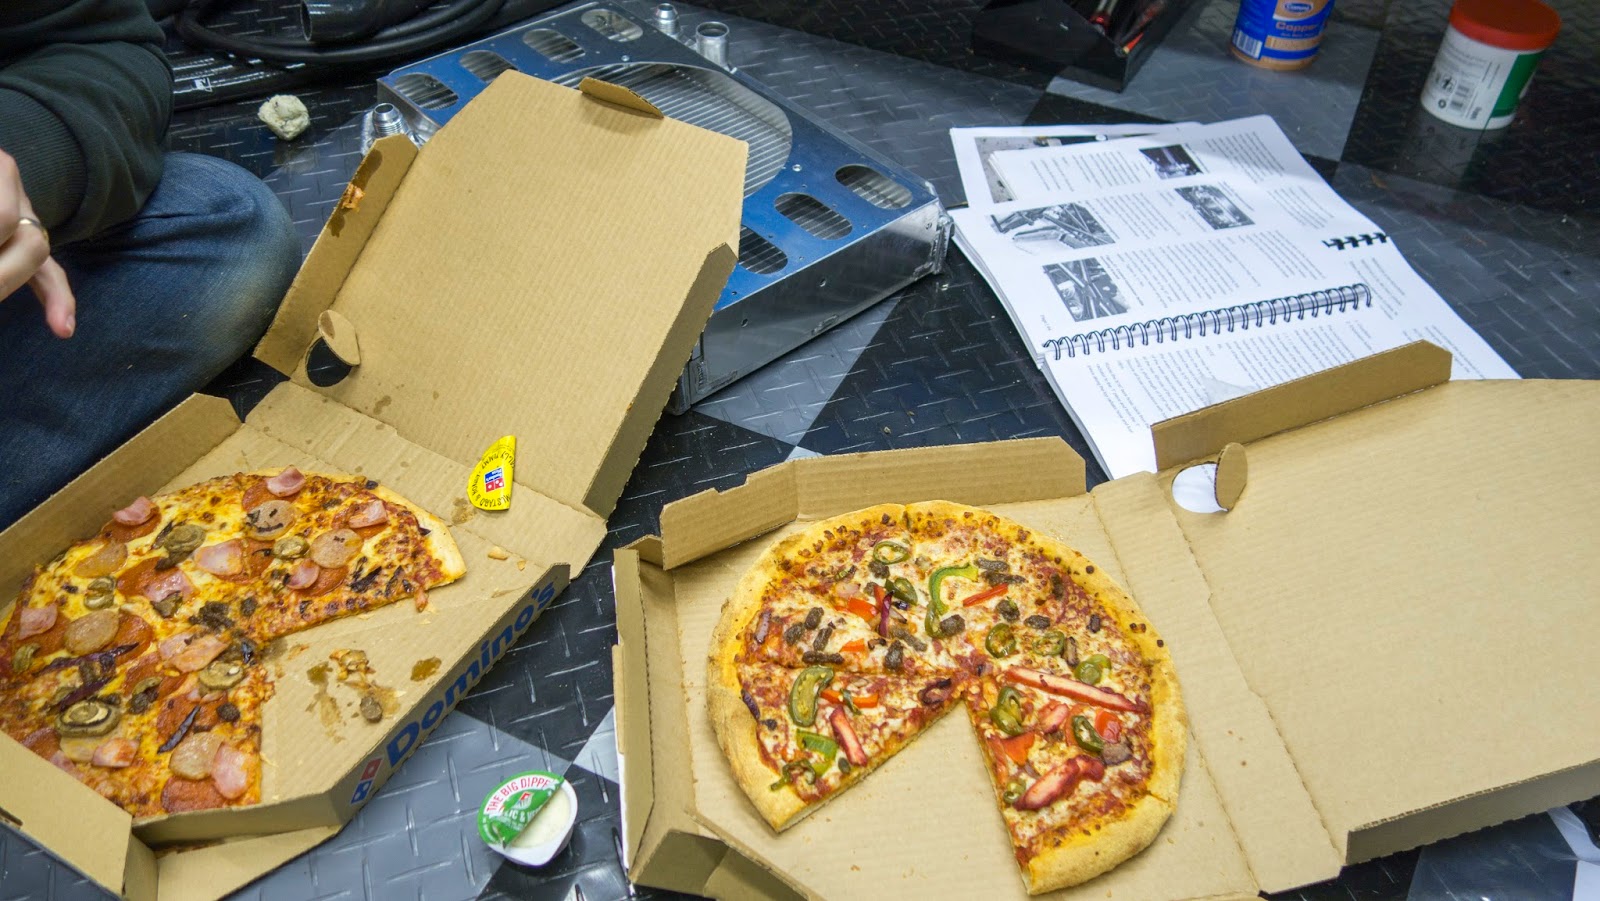 An energy boosting Domino's to gather our thoughts.